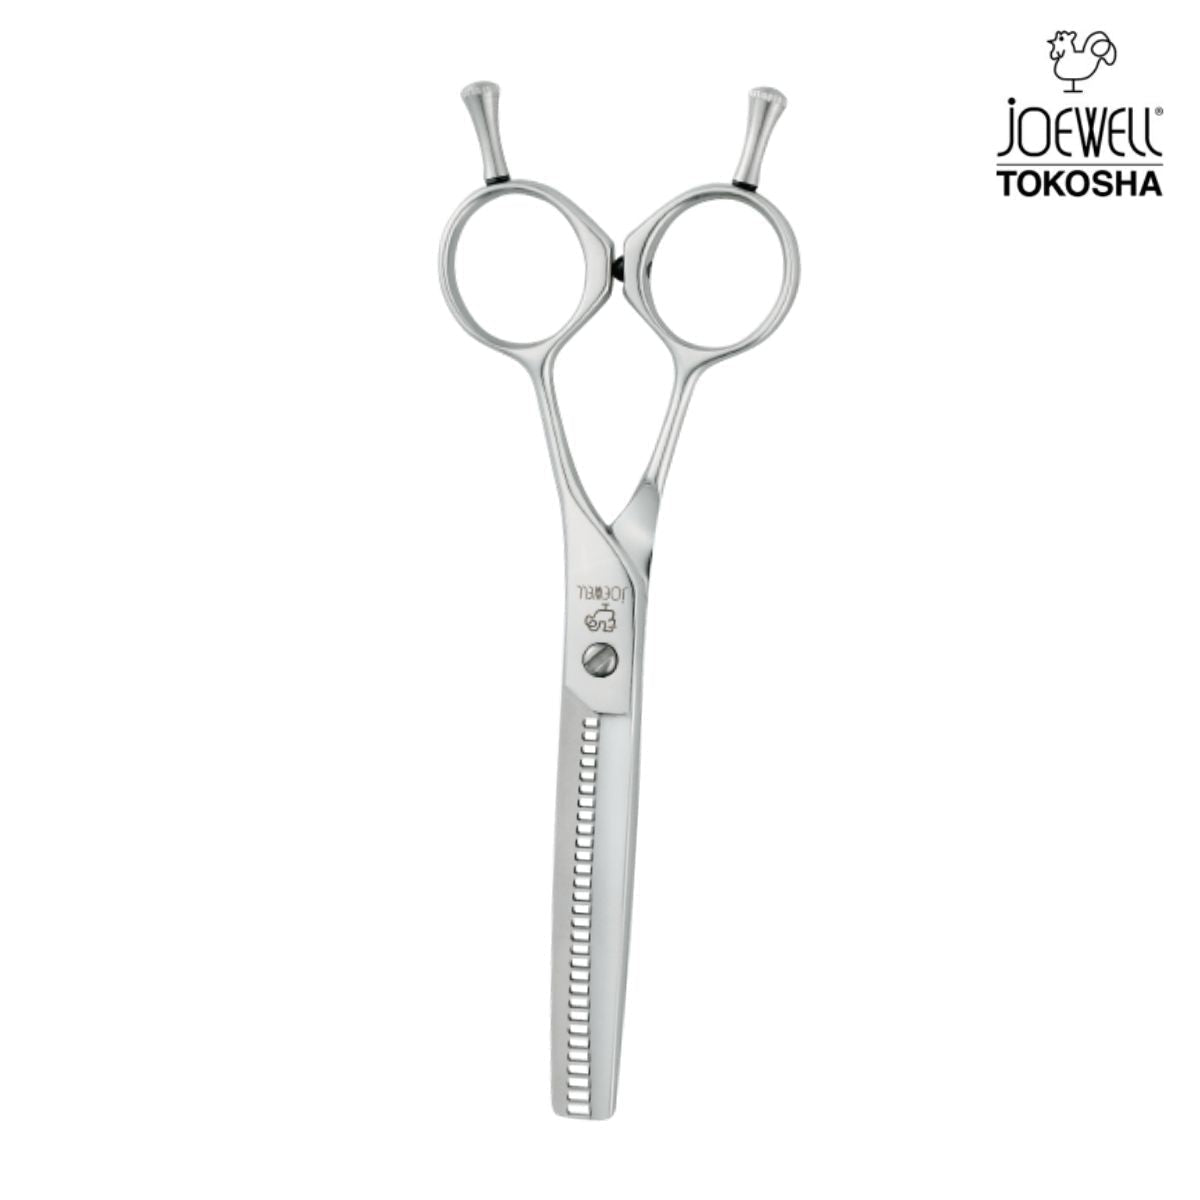 The best Joewell Japanese thinning shear is the E30 and E40 models.